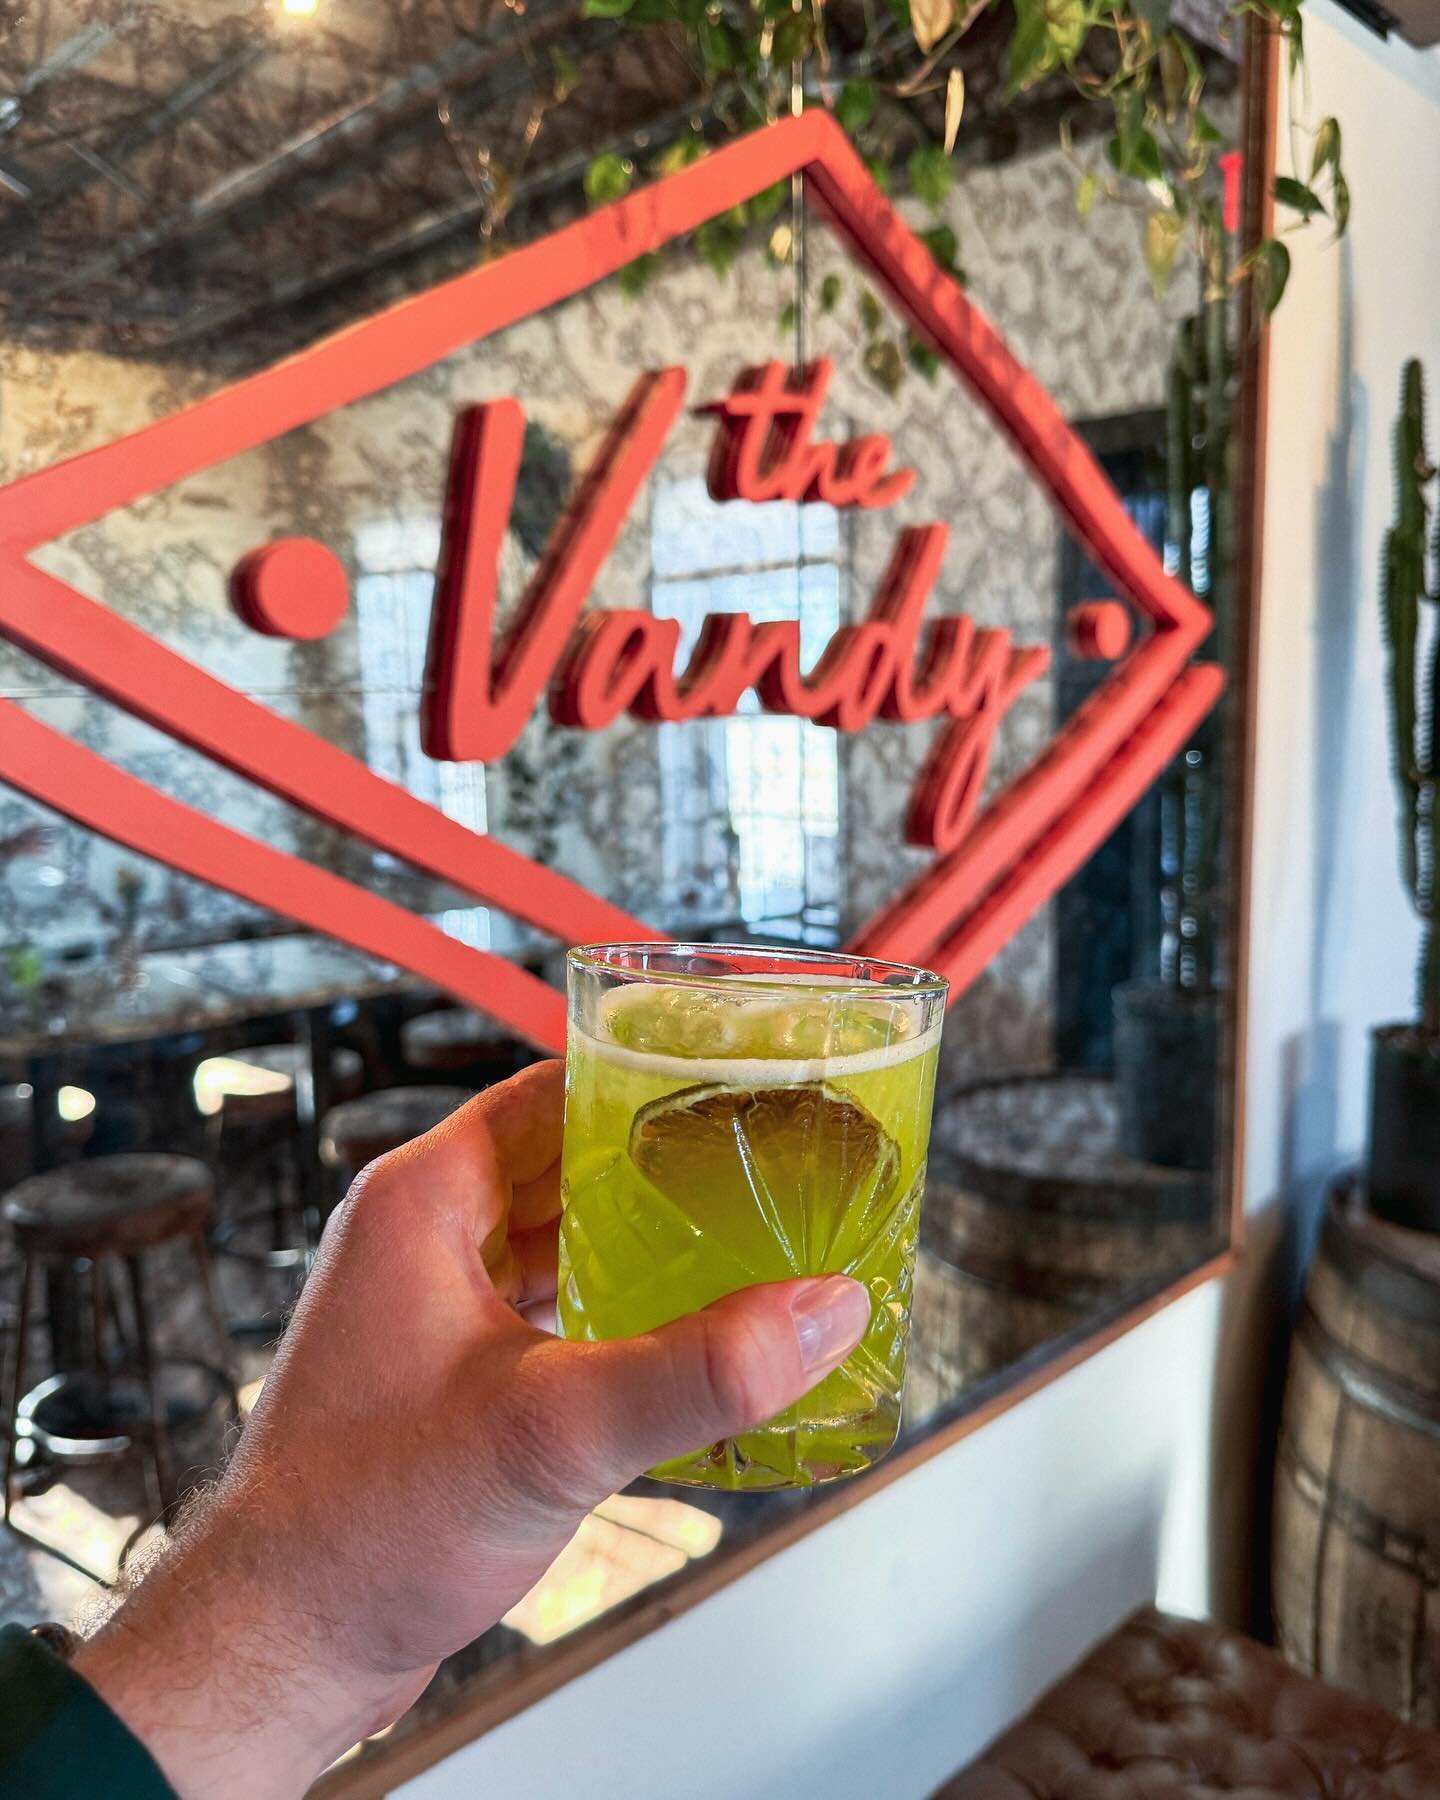 Did you know anyone in the hospitality industry gets to enjoy discounted bevys everyday? 🍹💸Just tell our bartender you&rsquo;re there for the hospitality menu + we&rsquo;ll hook you up as a token of our appreciation for all you do.

Hospitality pee